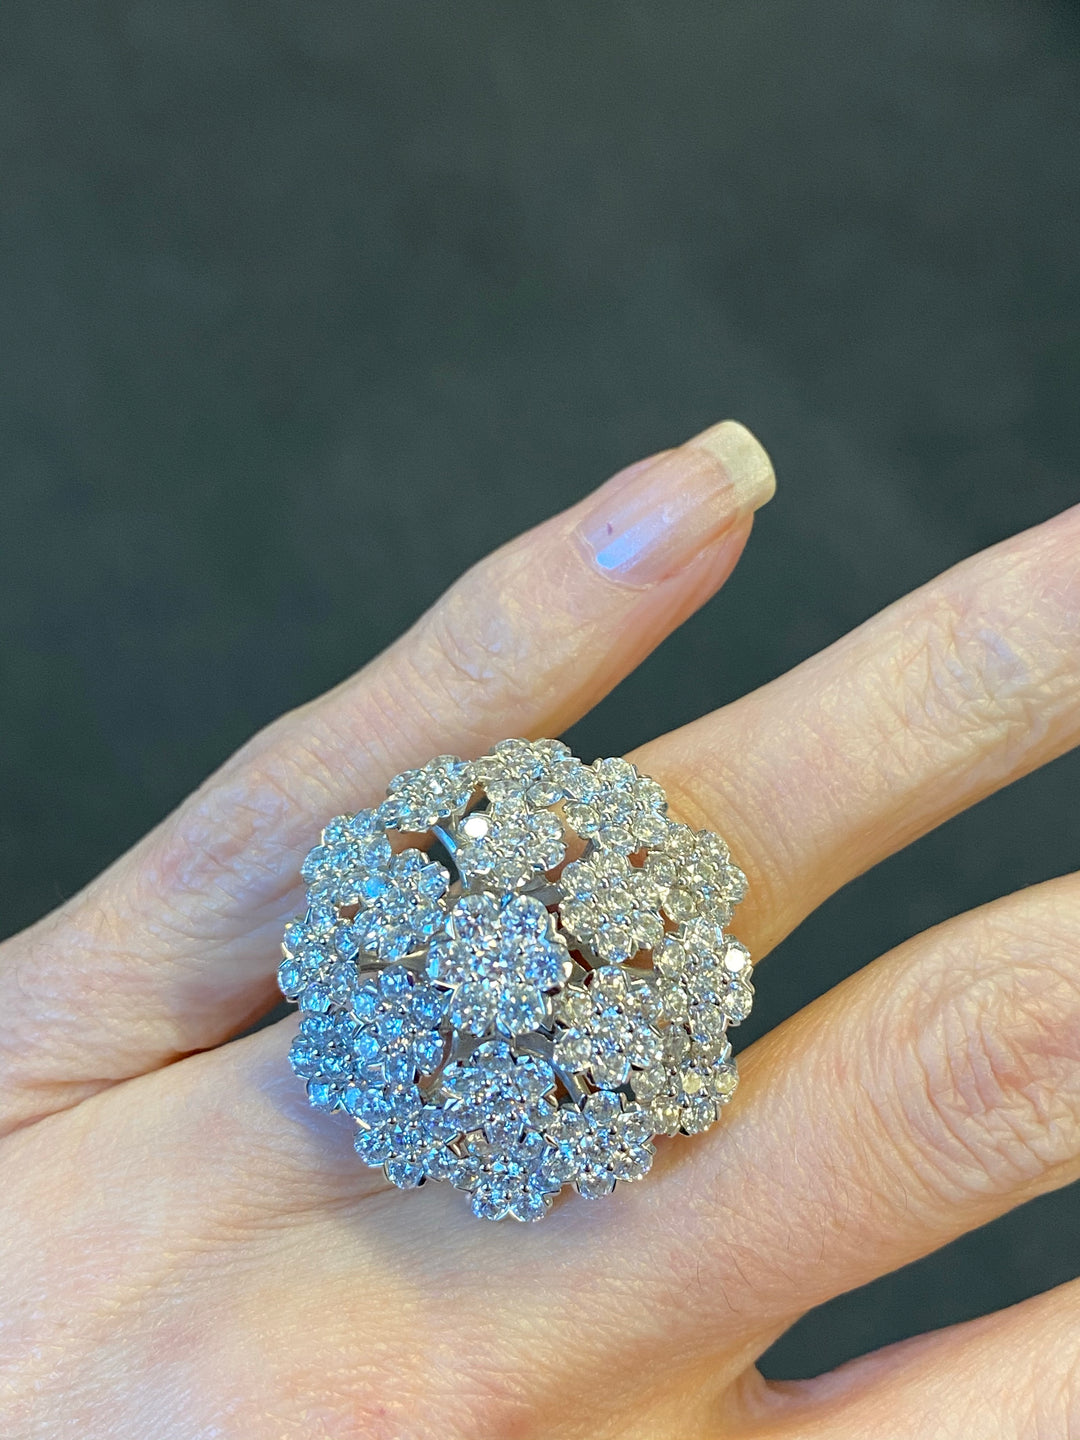 Massive Pave Diamond Flower Cluster Cocktail Ring in White Gold 